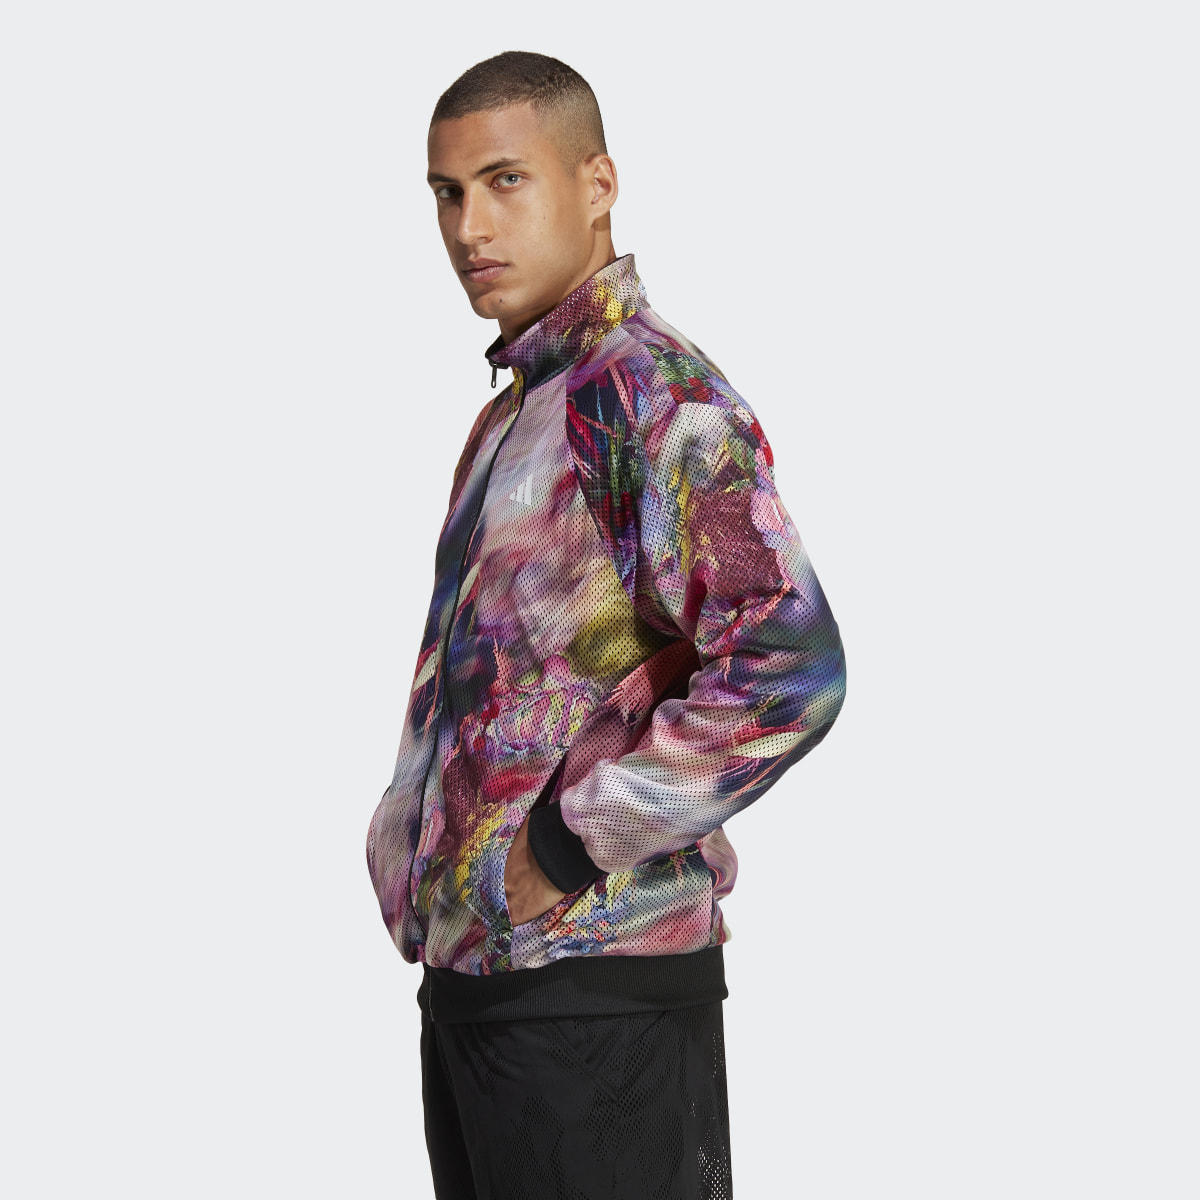 Adidas Melbourne Tennis Stretch Woven Reversible Jacket. 4